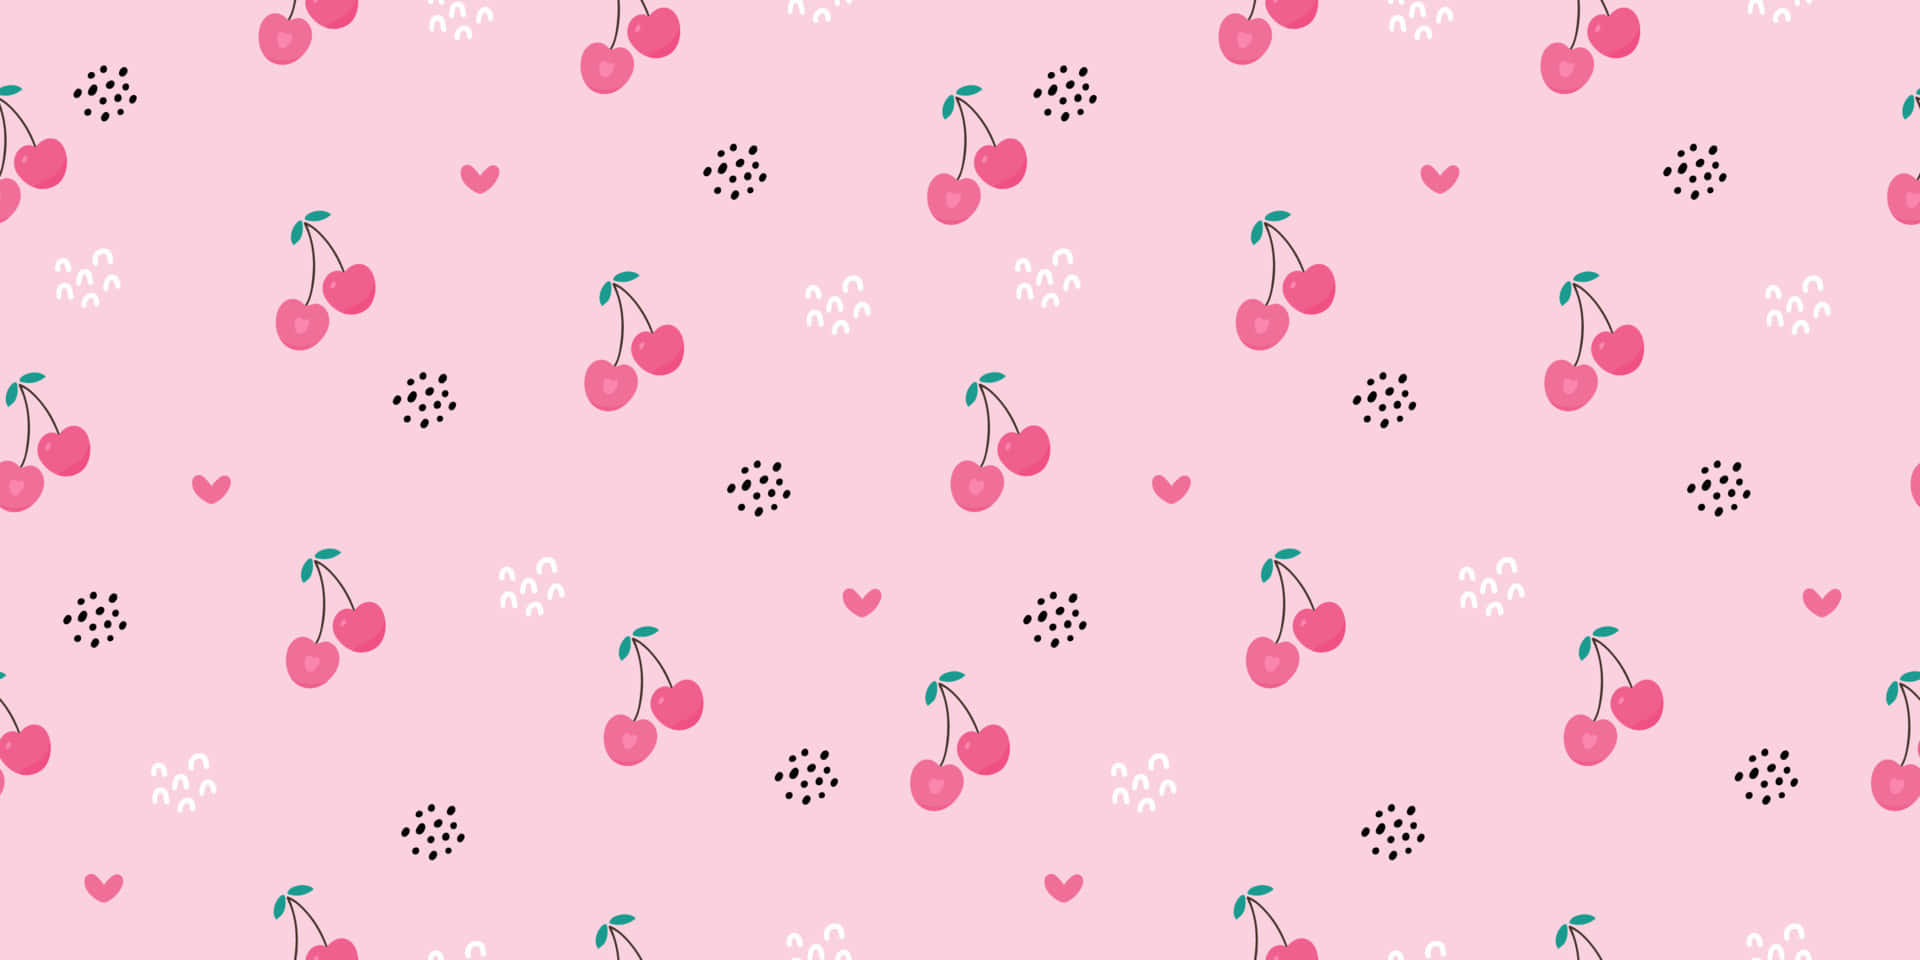 A Pink Pattern With Cherries And Hearts Wallpaper